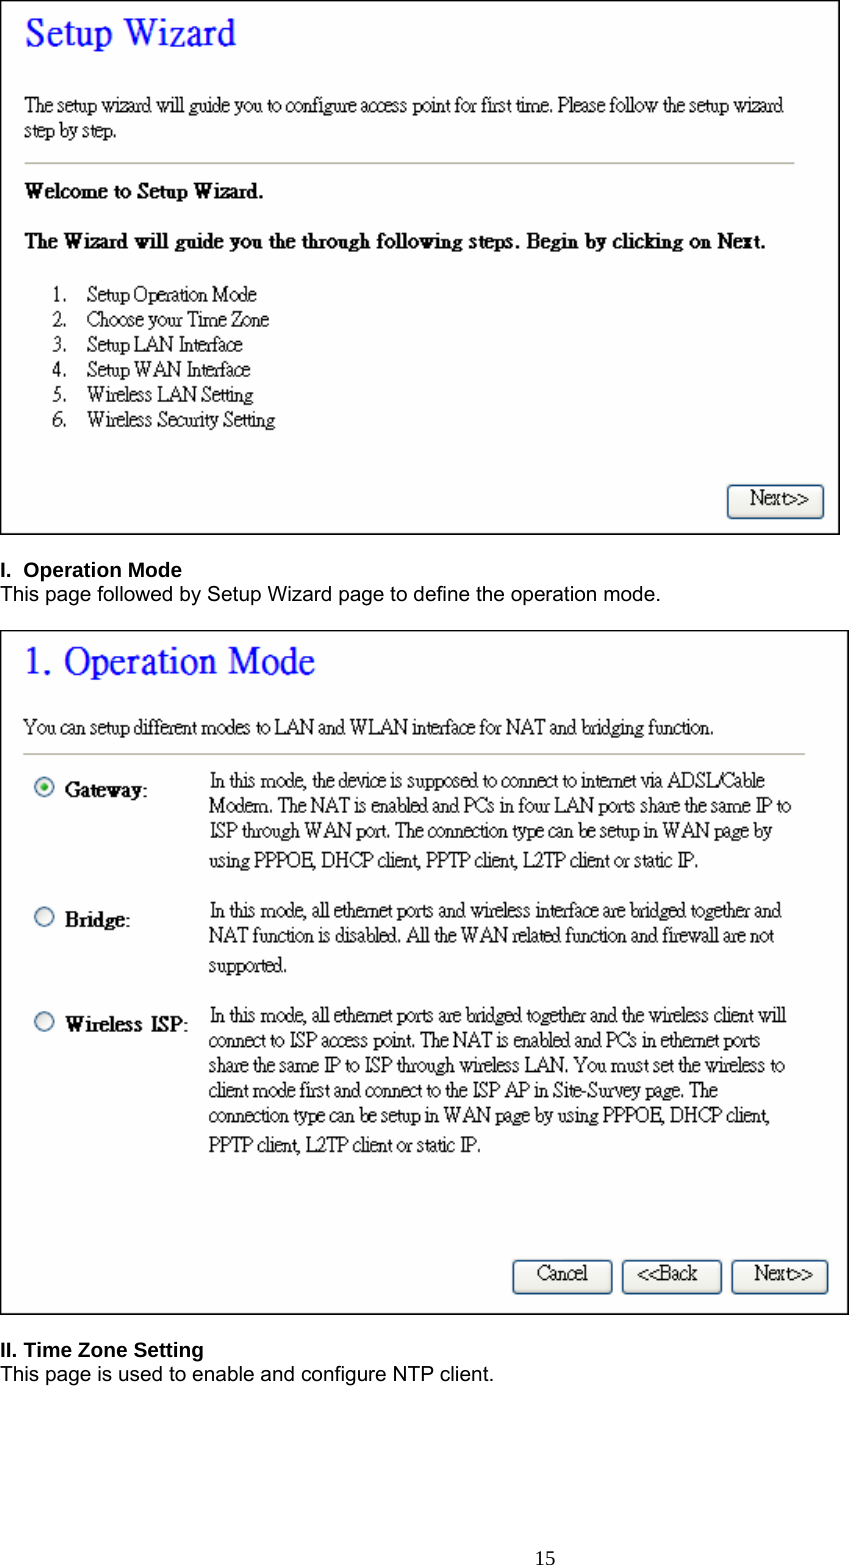   I. Operation Mode This page followed by Setup Wizard page to define the operation mode.    II. Time Zone Setting This page is used to enable and configure NTP client.      15